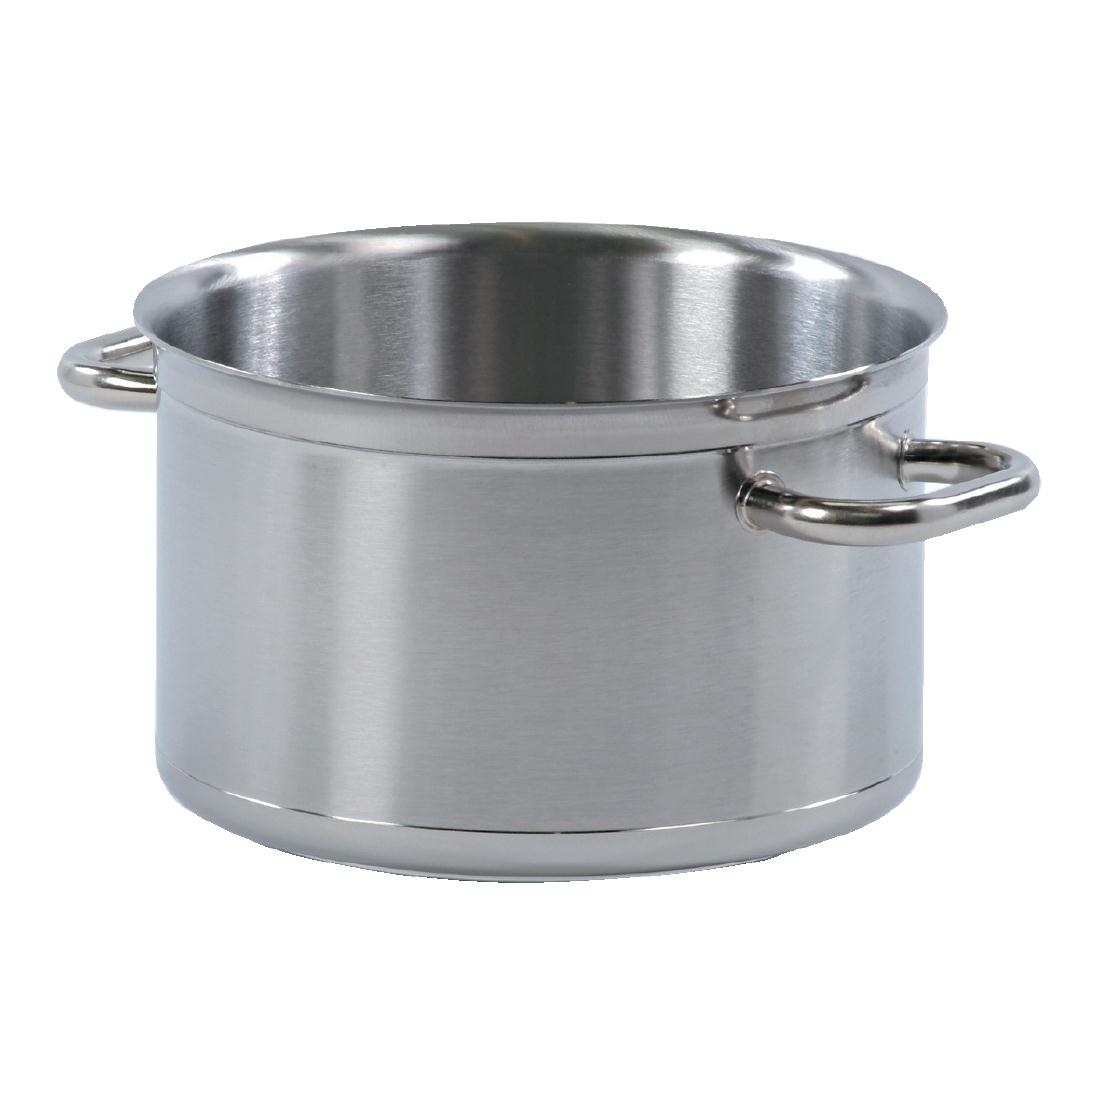 Bourgeat Tradition Plus Boiling Pan 24Ltr